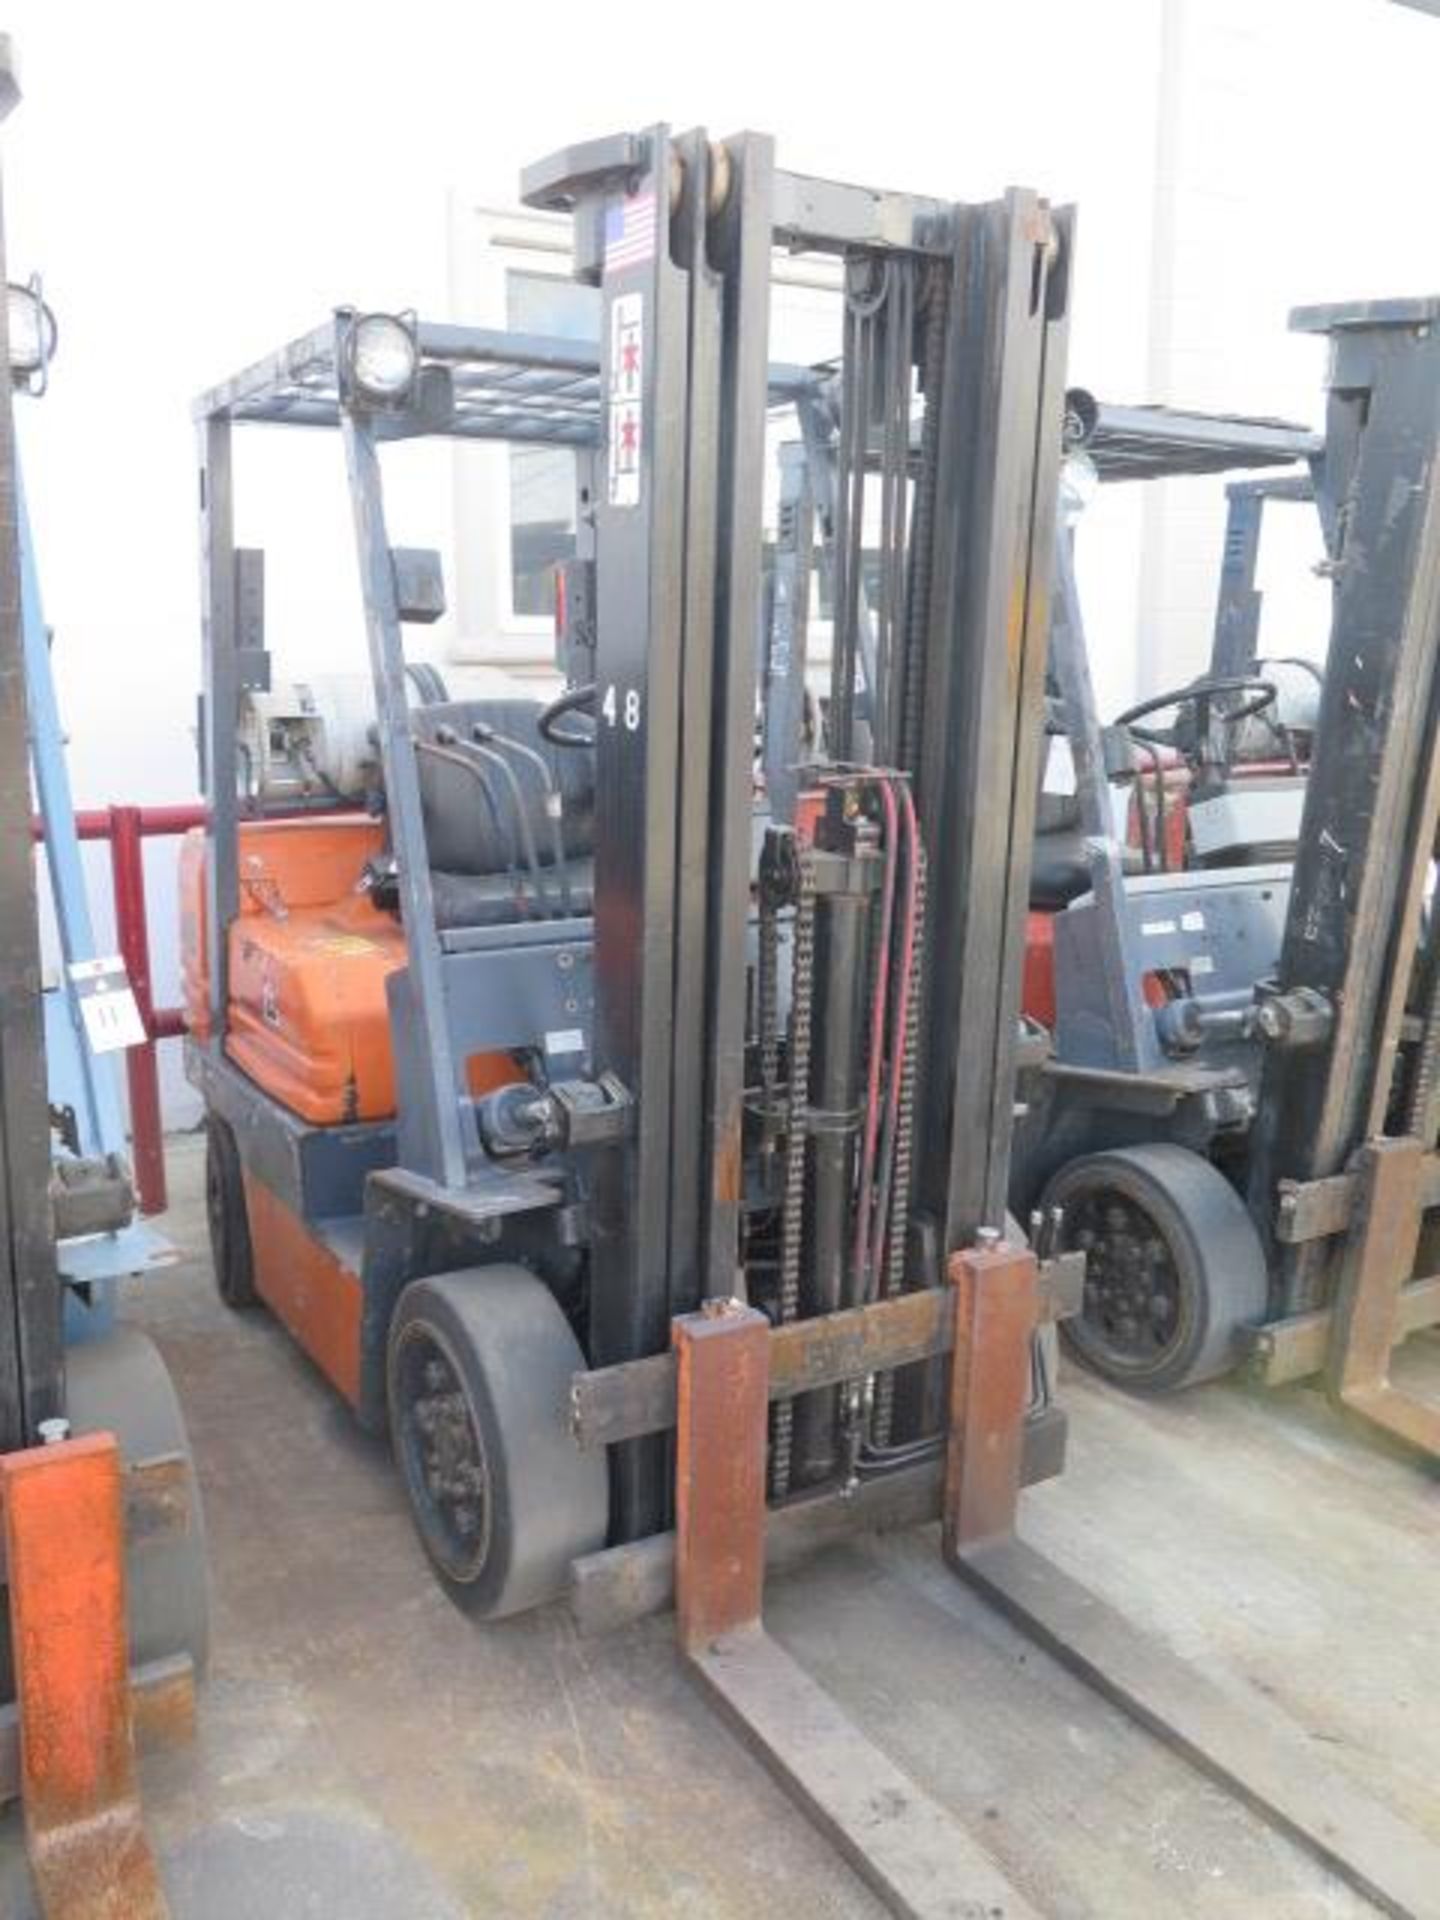 Toyota 5FGC25 5000 Lb Cap LPG Forklift s/n 5FGCU25-84457 w/ 3-Stage Mast, 185" Lift Height, - Image 2 of 11